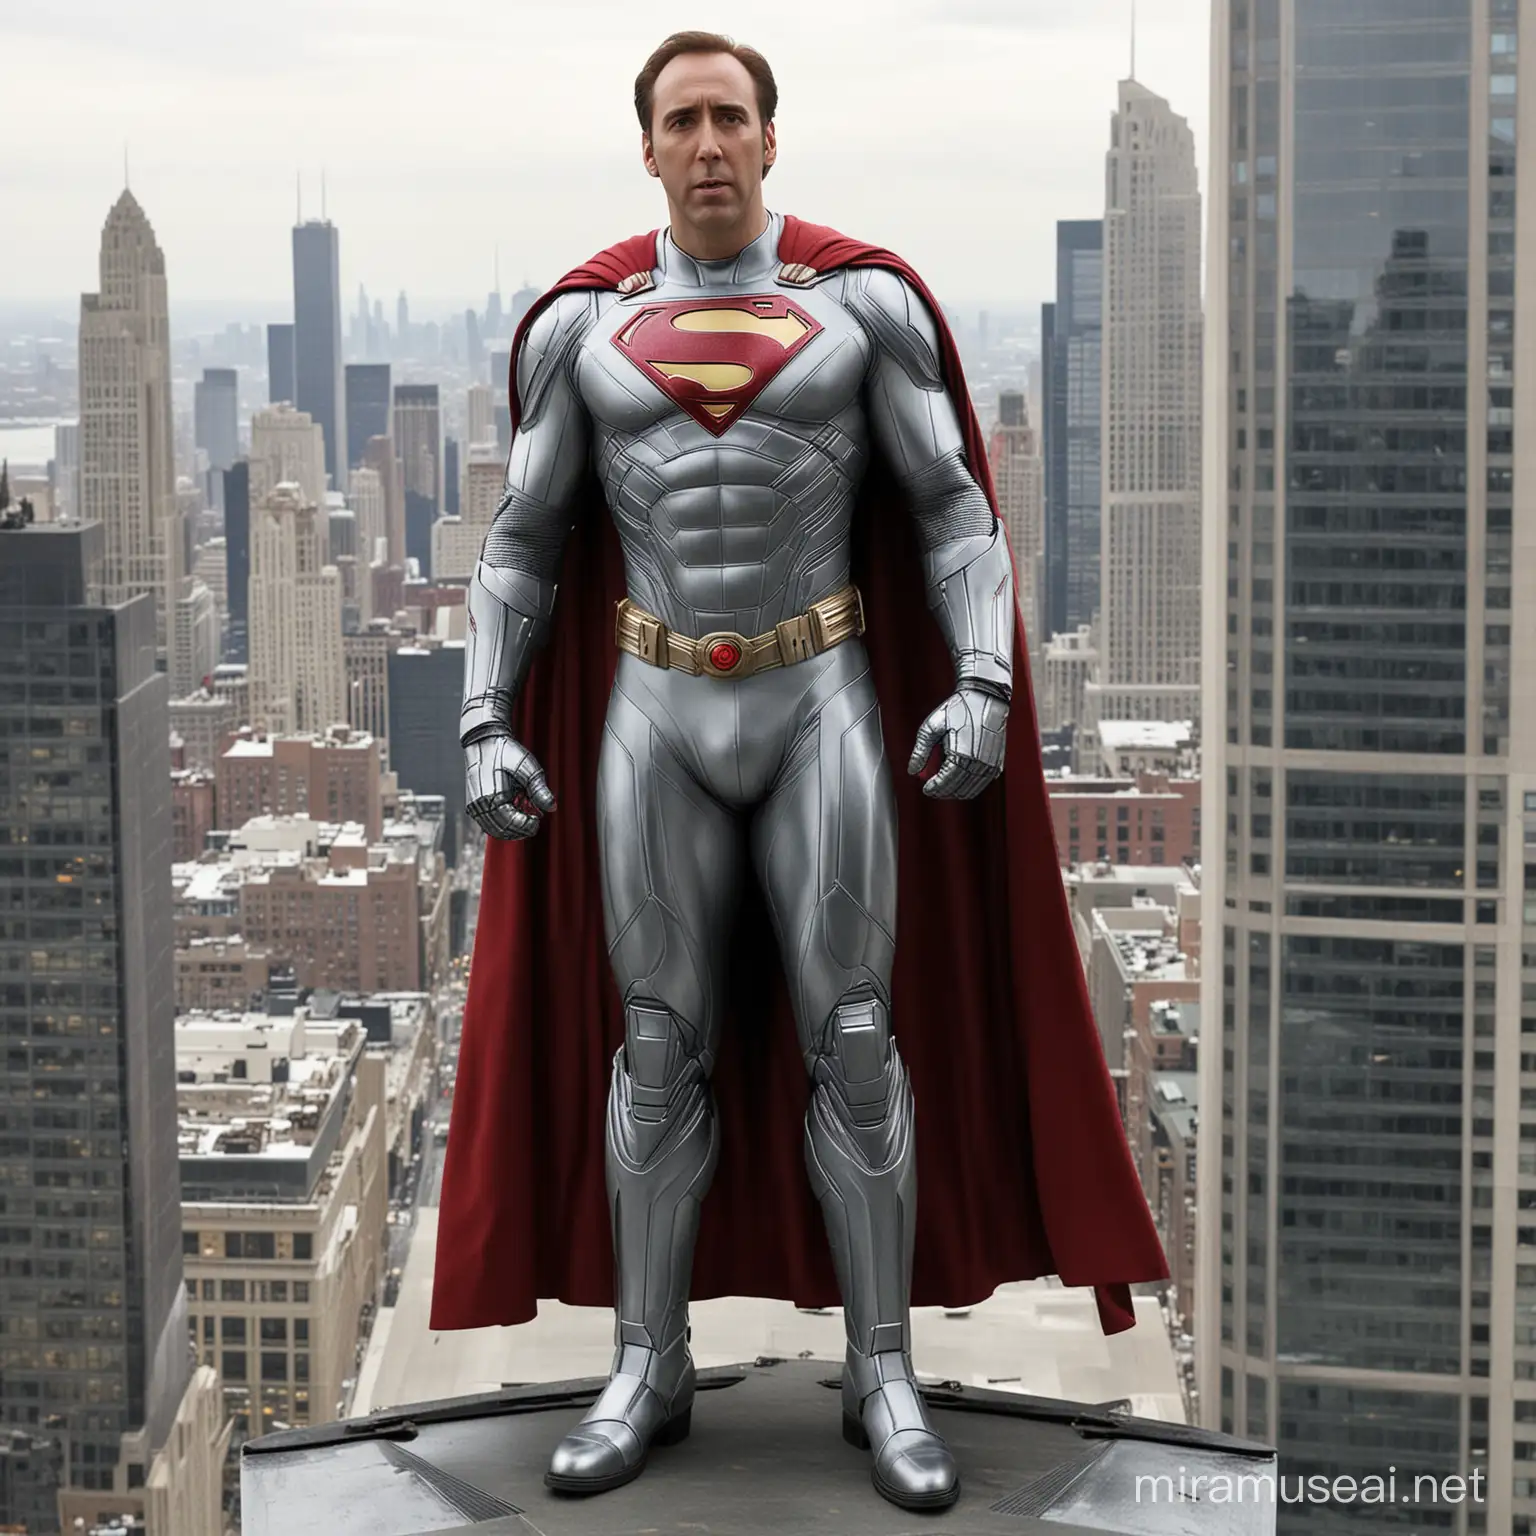 Nicolas Cage with a bald head as Lex Luthor wearing Lex Luthor's armored Superman suit, standing on top of a building with the Daily Planet building in the background, show his whole body, head to toe view, Armored Superman suit, standing in an ultra modern penthouse office with floor to ceiling windows, Chicago in the background, bald headed, no hair, robotic Superman armor, mechanical Superman armor, Silver suit with red accents, shaved head, the logo should be illuminated, extra armor on his feet, bright sunny day, square toed boots, floor length cape, silver boots, gloves should cover his fingers 